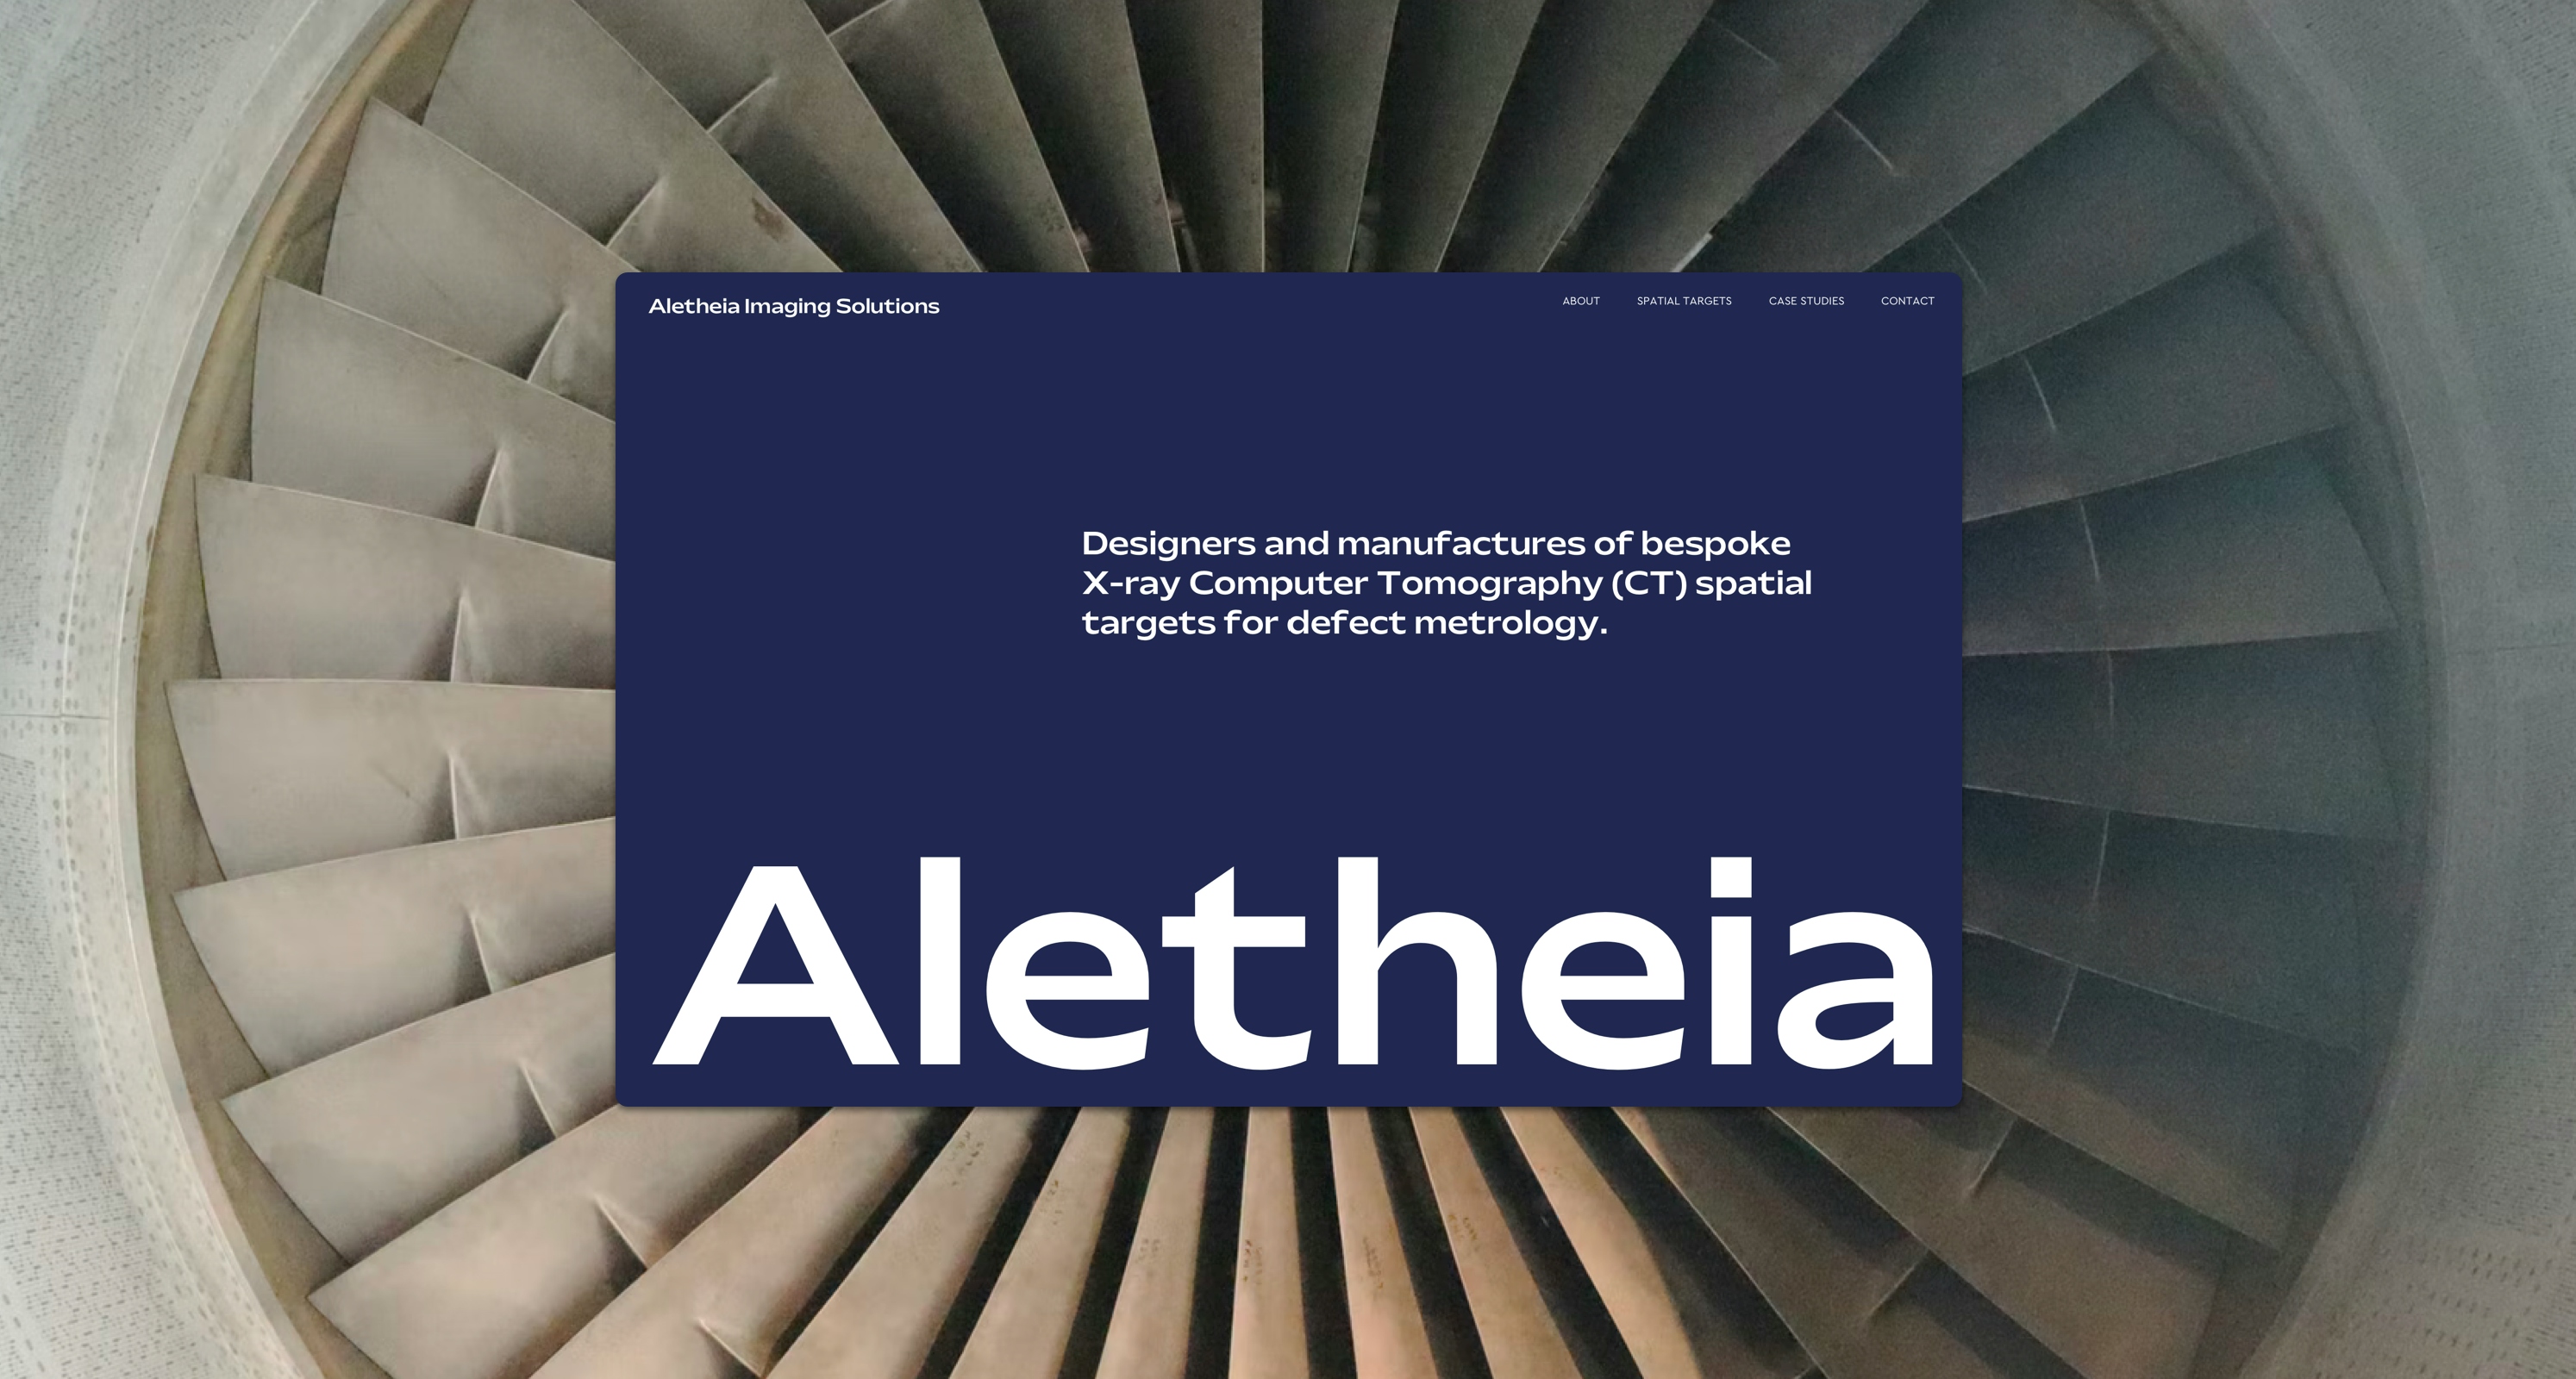 An image of a fan with ‘Alethia’ written on a blue background with “Designers and manufacturers of bespoke X-ray Computer Tomography (CT) spatial targets for defect metrology ”